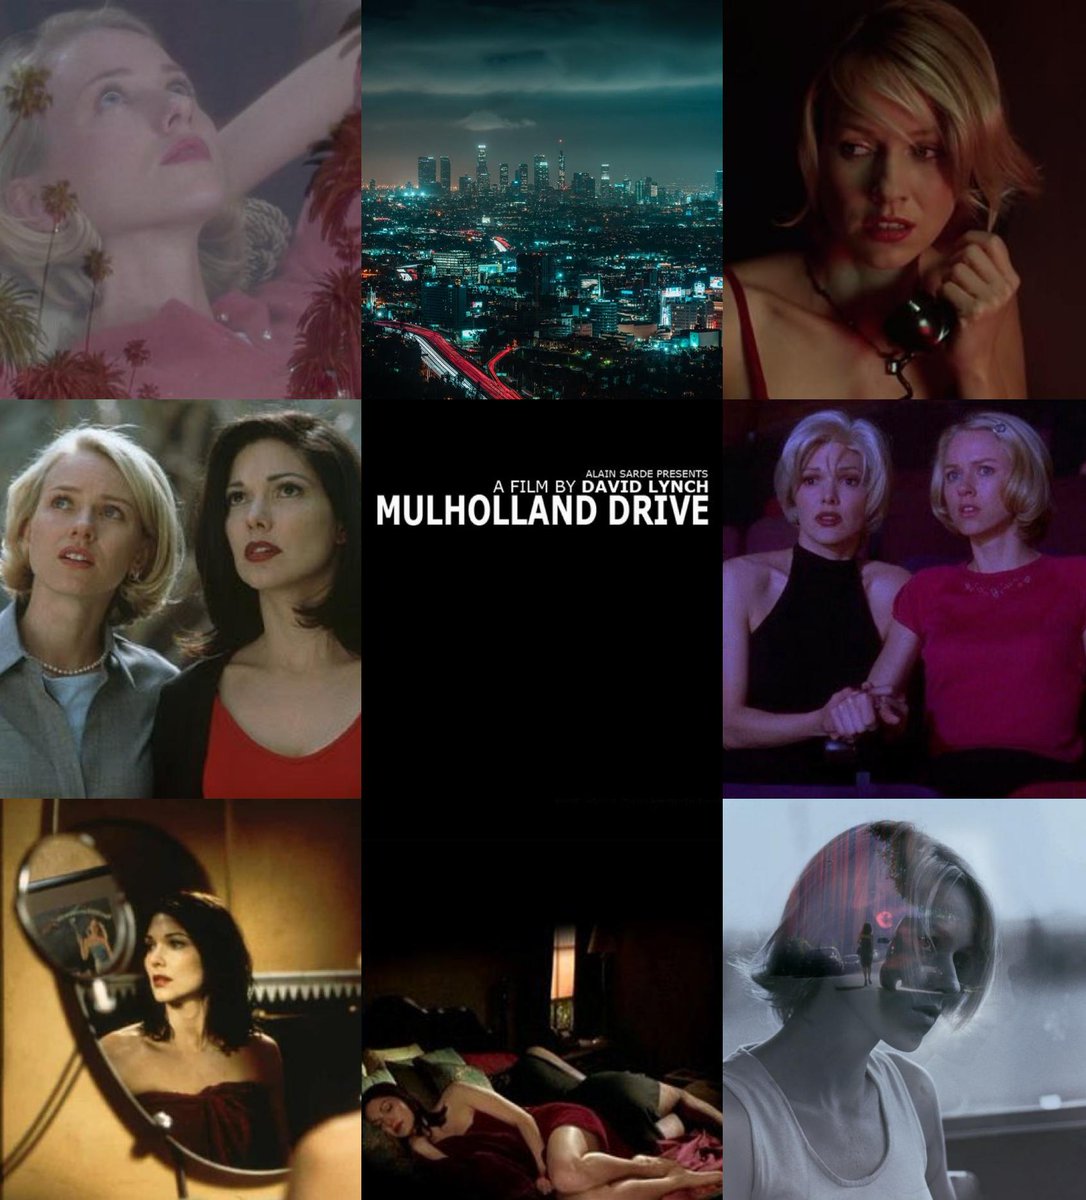 Directed by D.Lynch

the masterpiece in 2001

it's generally considered
his greatest work and
very difficult to understand.
a space-time distortion happens
and everything you watch
is not always true.
But
people gravitate towards
the extremely fascinating art.

#MULHOLLANDDRIVE